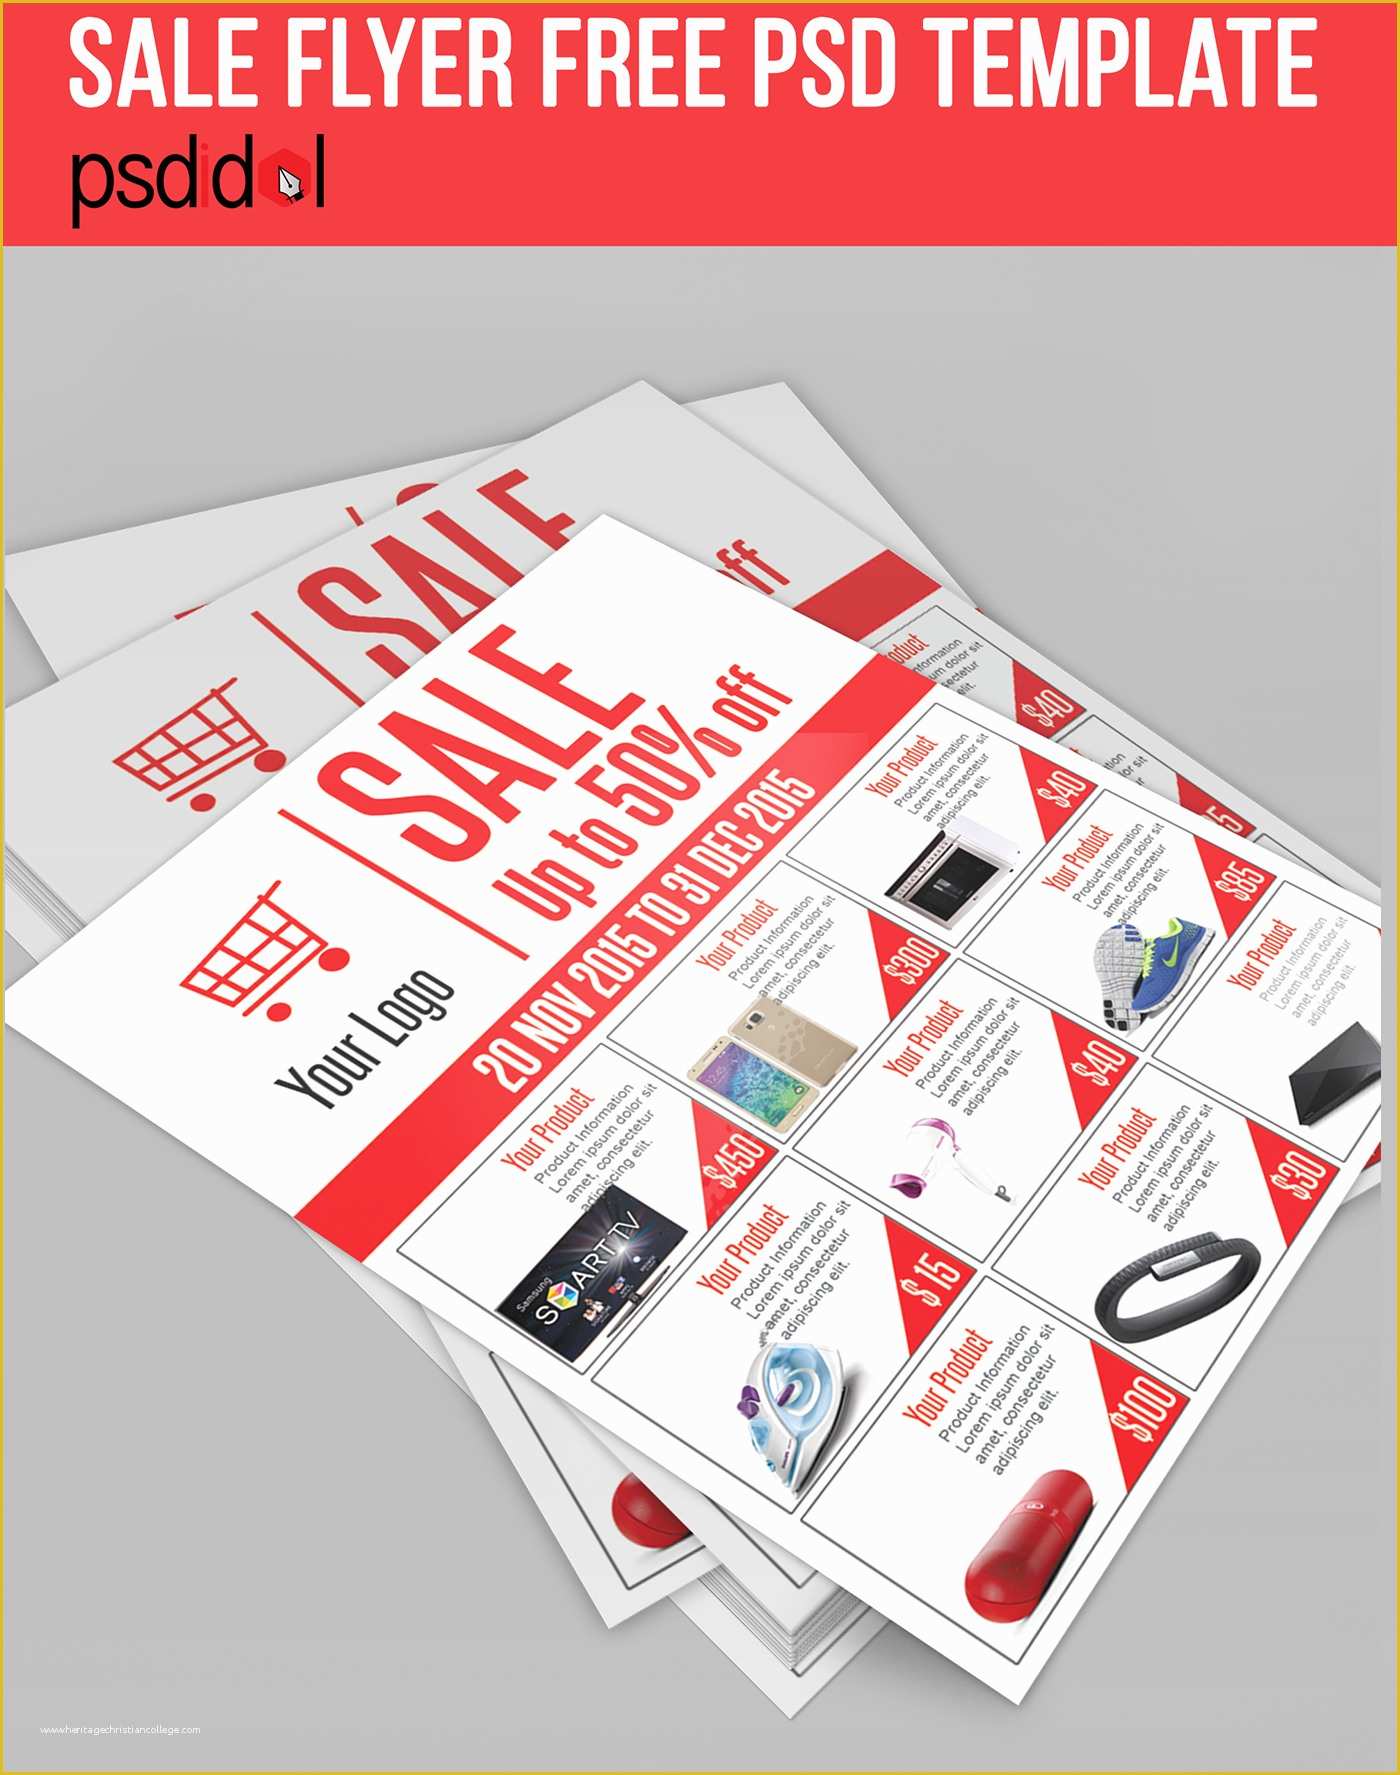 Supermarket Flyer Template Free Of Sale Flyer Free Psd Template Download On Behance